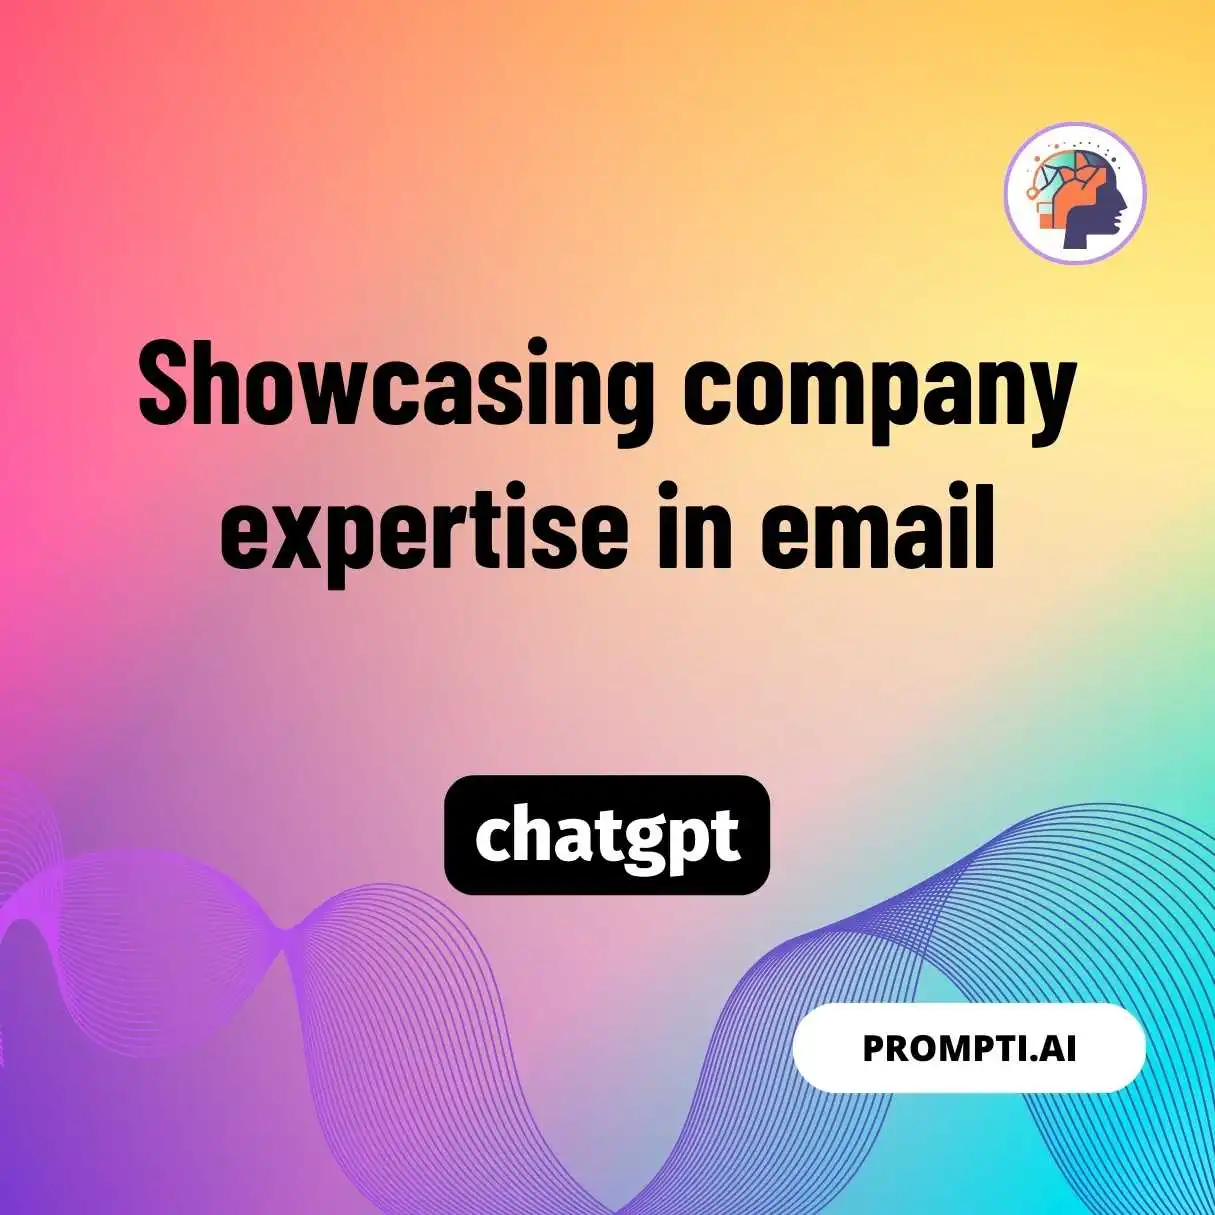 Showcasing company expertise in email